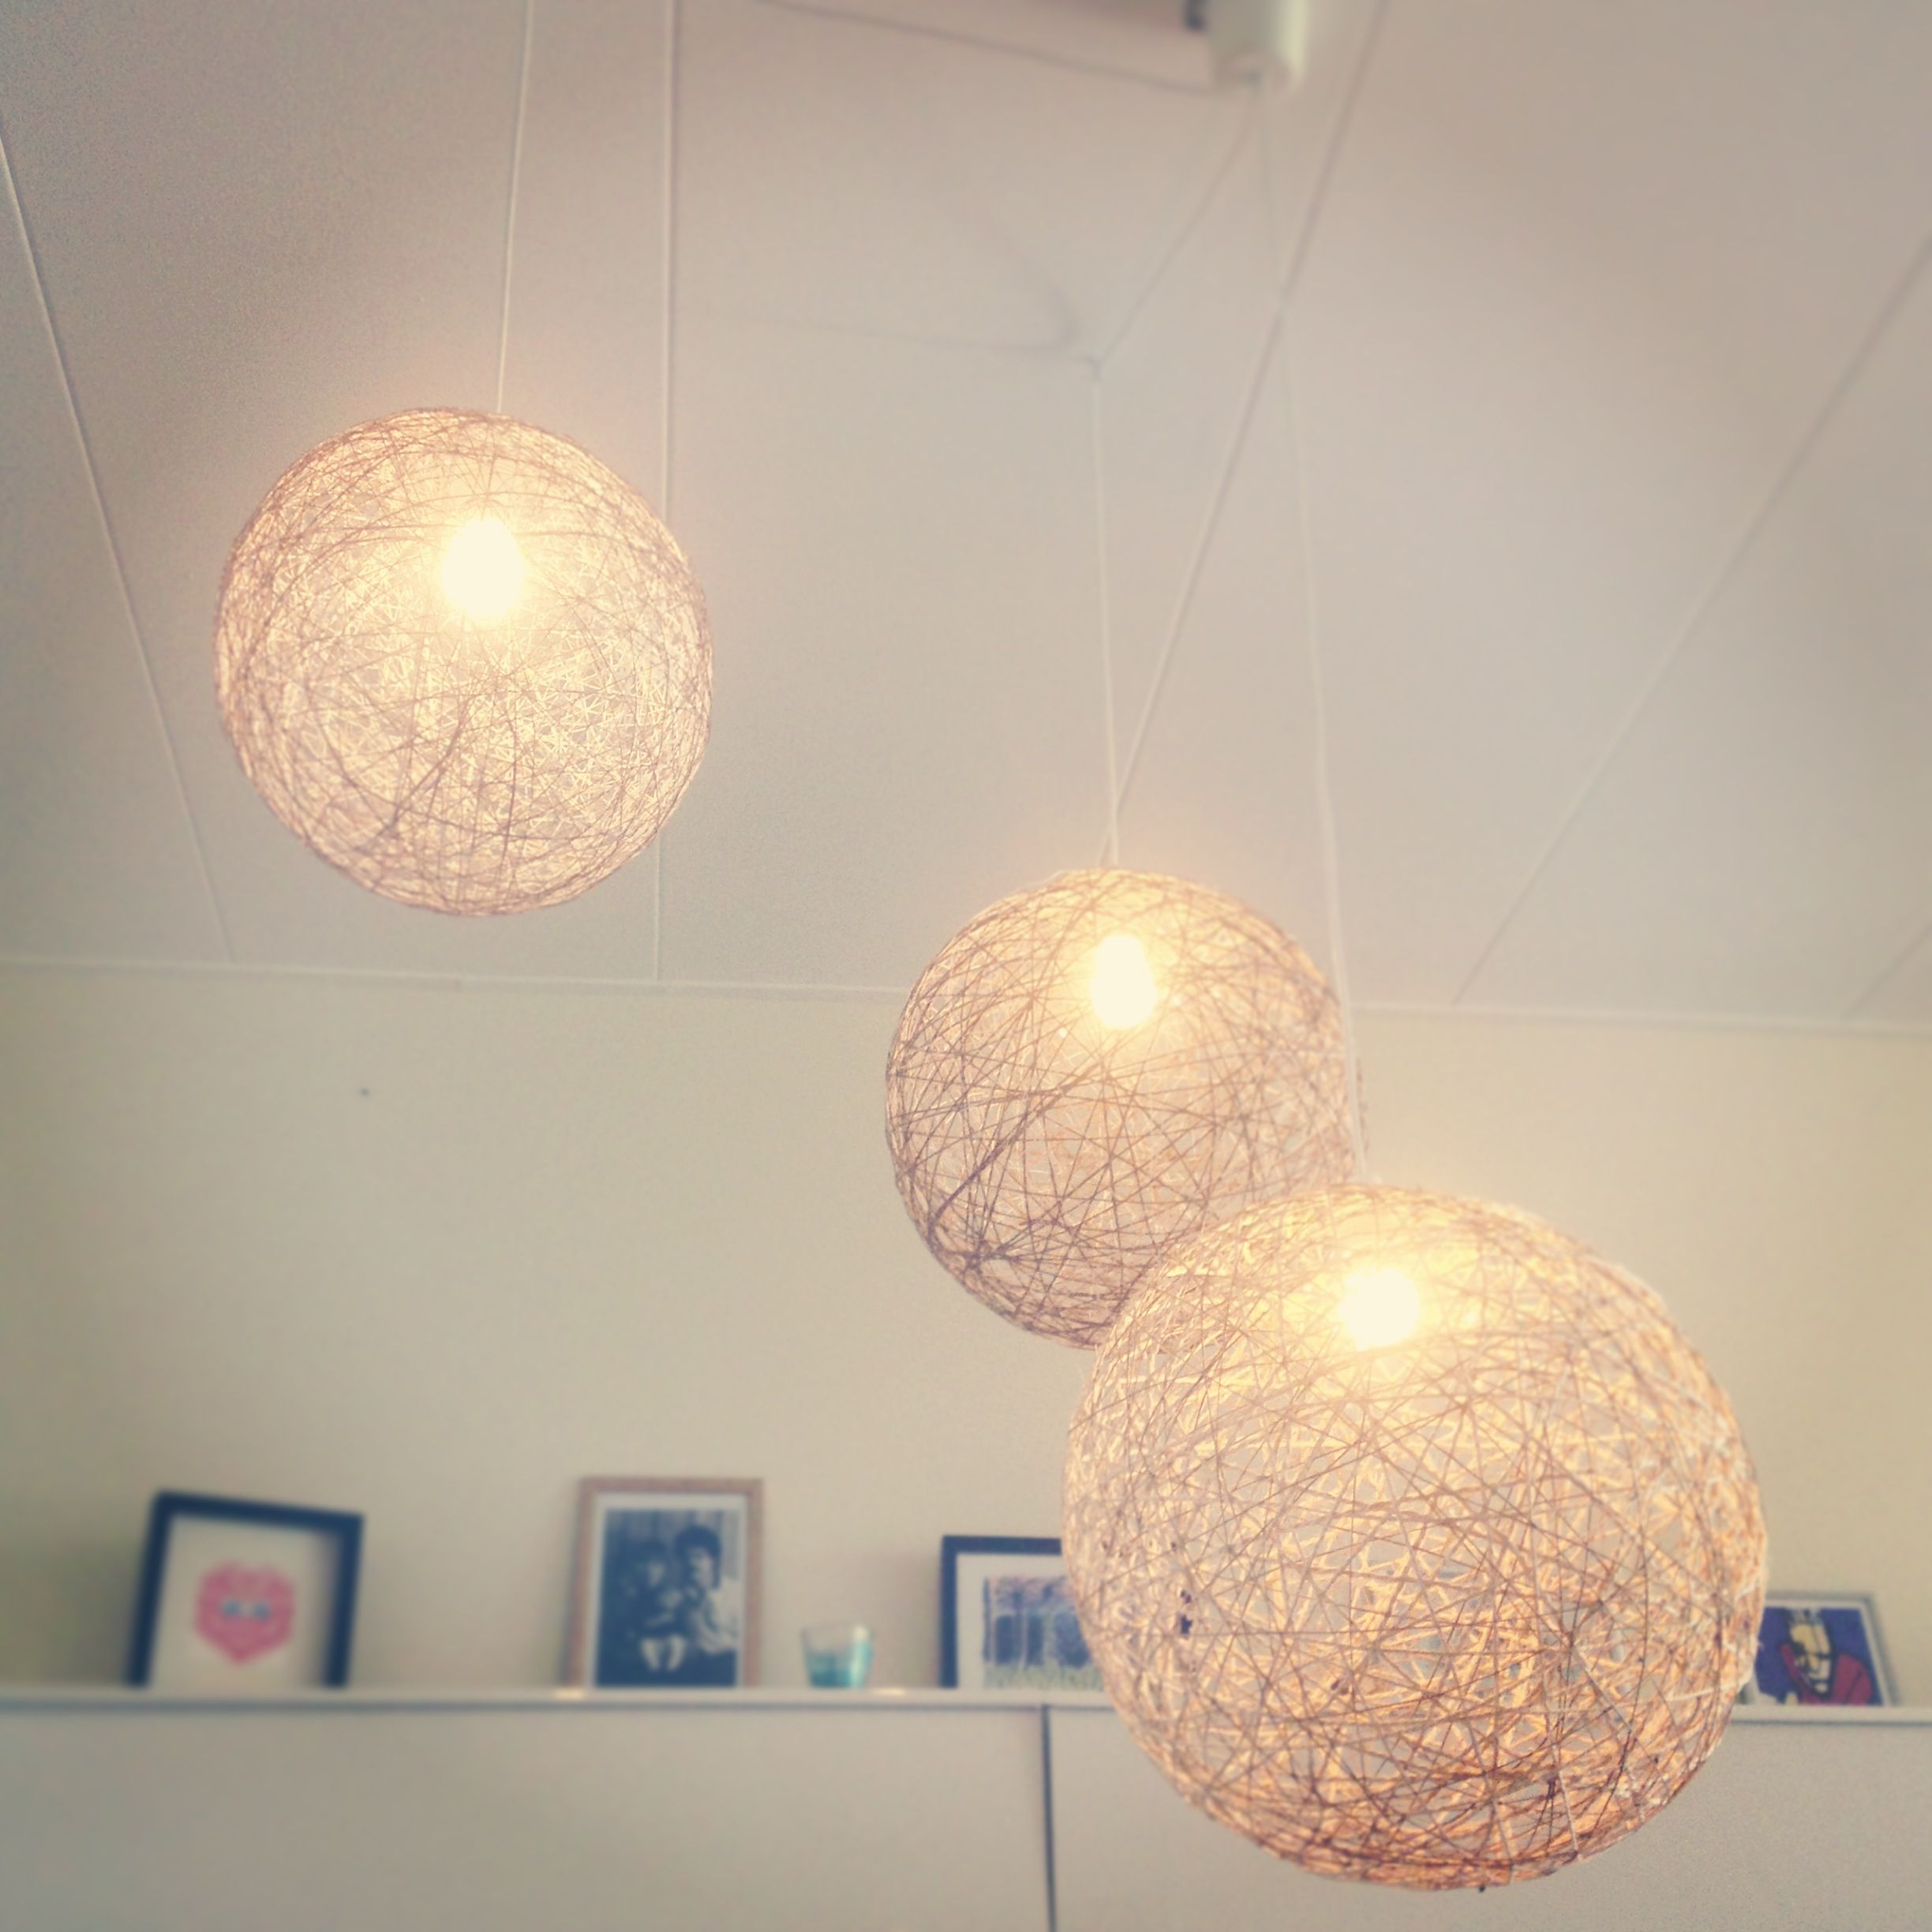 Handmade String Lamps You Need A Inflatable Beachball Glue For